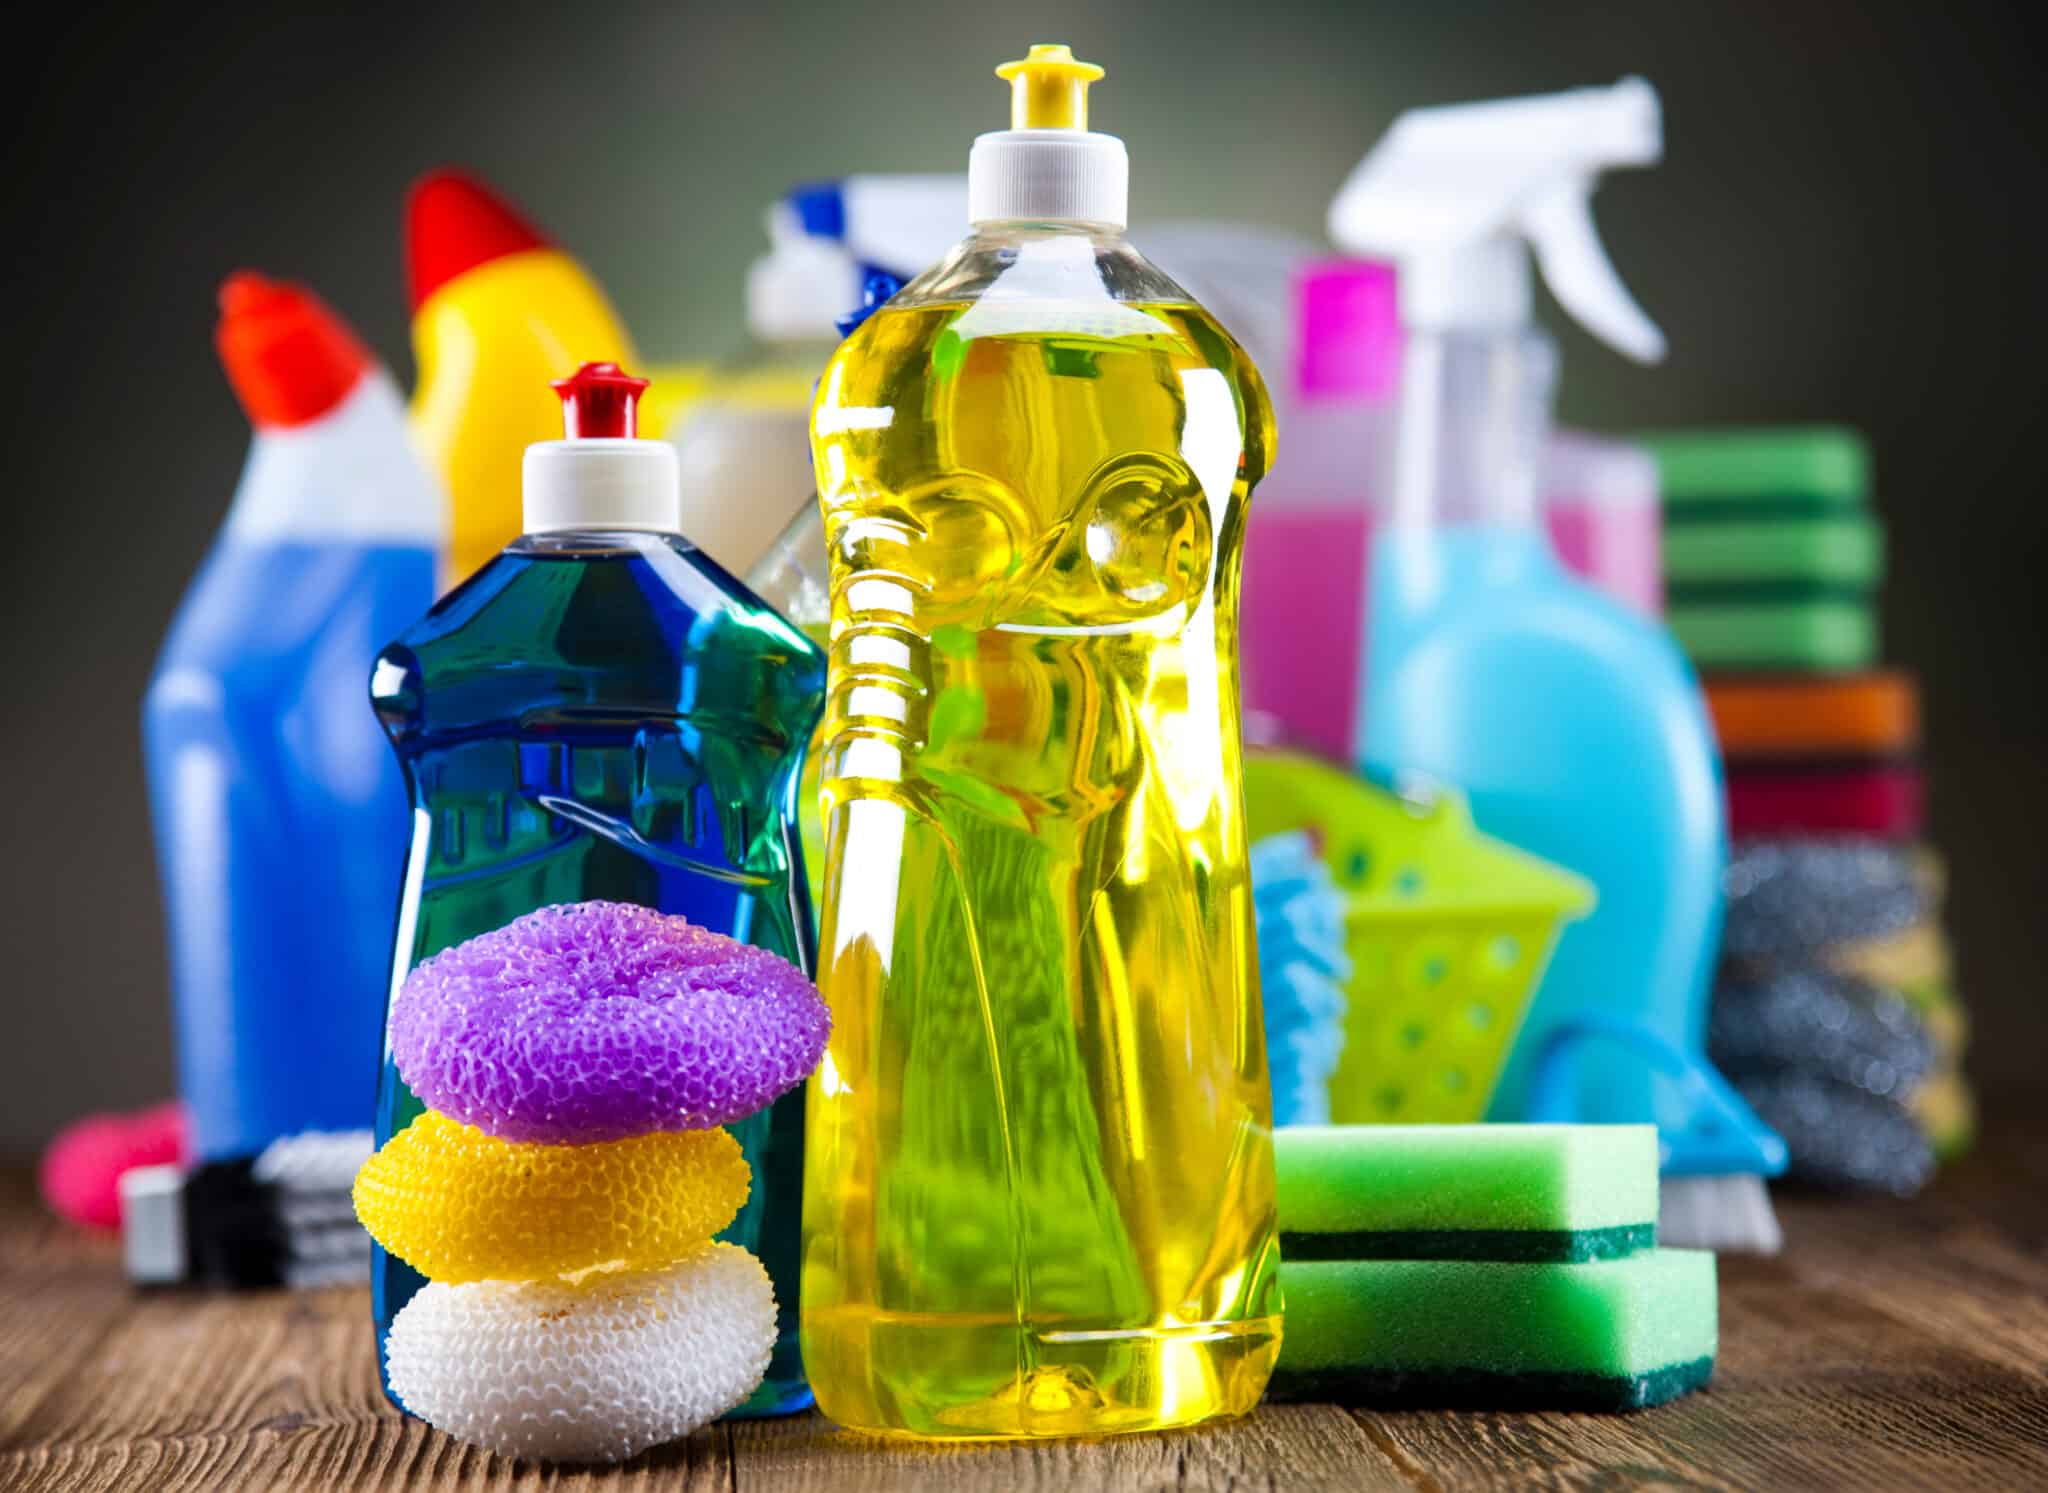 https://www.extermpro.com/wp-content/uploads/2022/09/assorted-cleaning-products-stockpack-adobe-stock-scaled.jpg